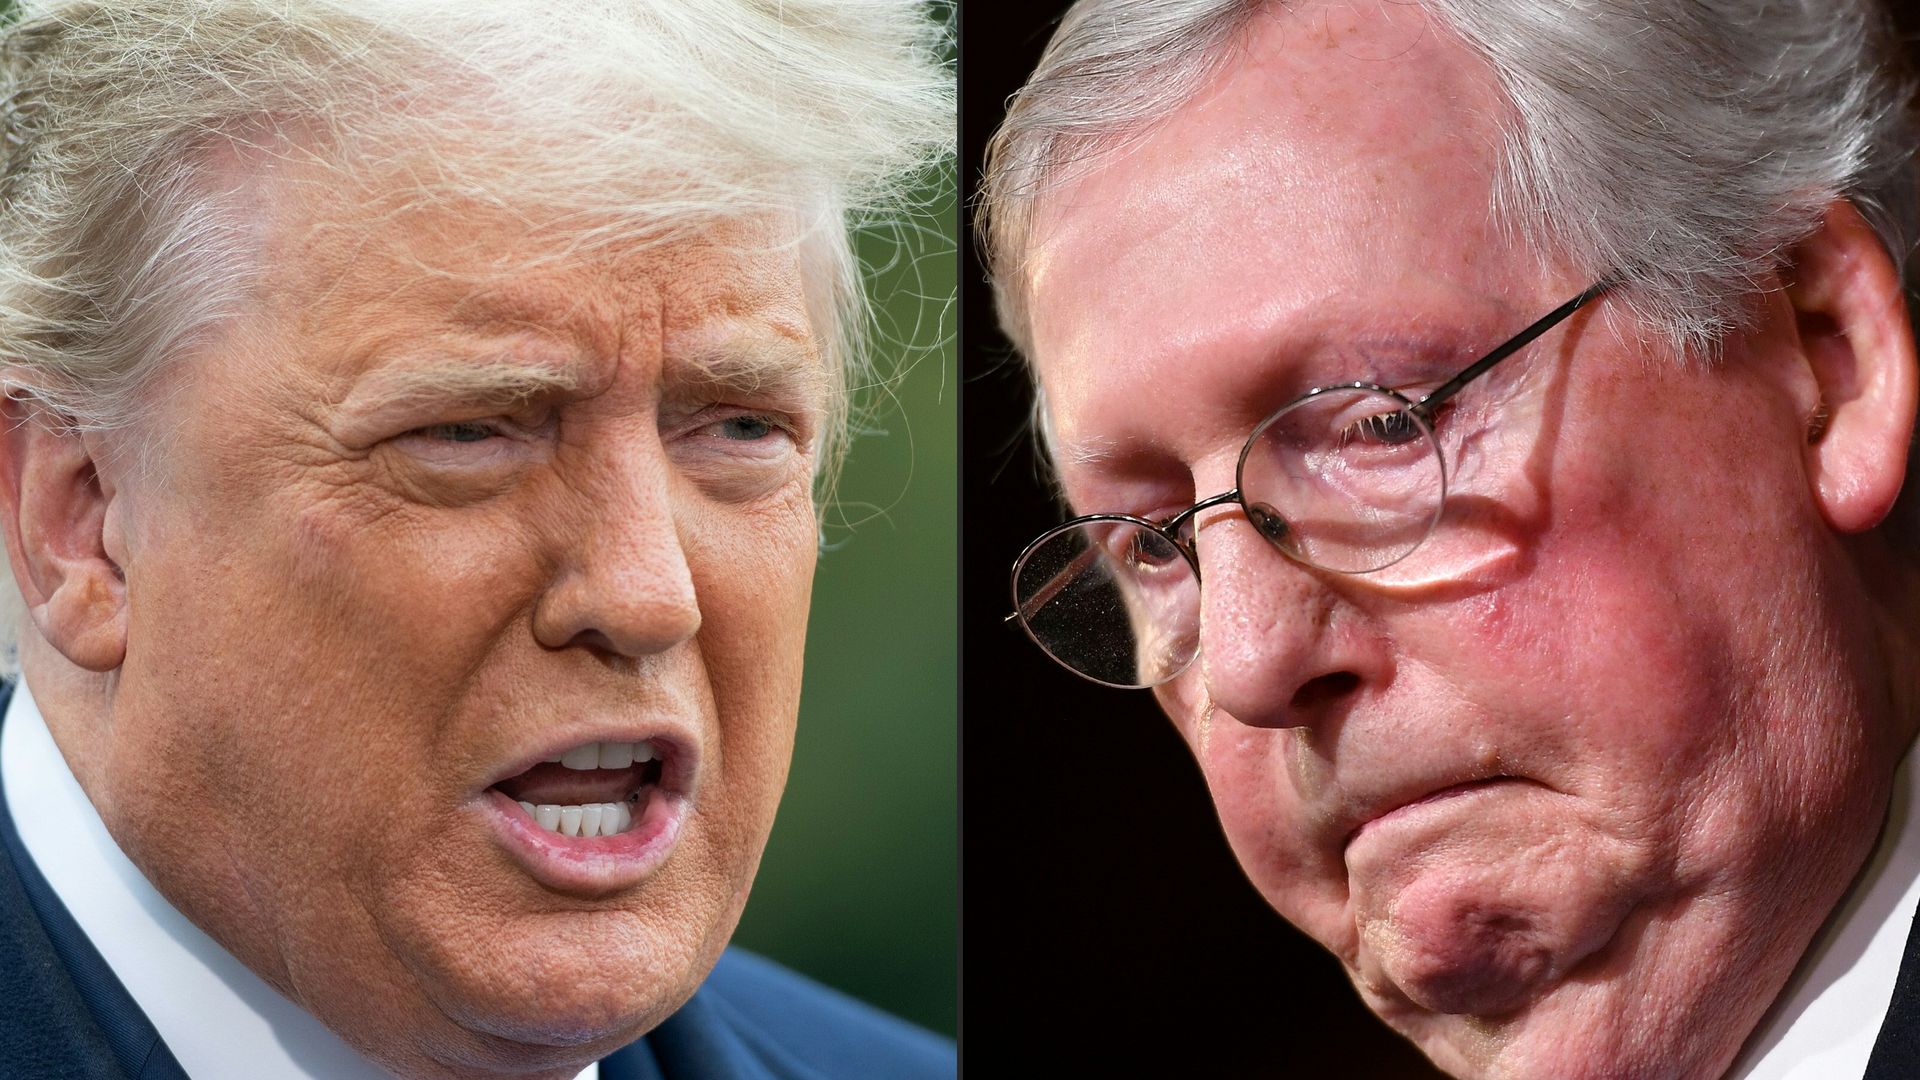 This combination of pictures created on February 16, 2021 shows US President Donald Trump in Washington, DC, October 27, 2020 and US Senate Majority Leader Mitch McConnell (R-KY)on Capitol Hill in Washington, DC on February 5, 2020.